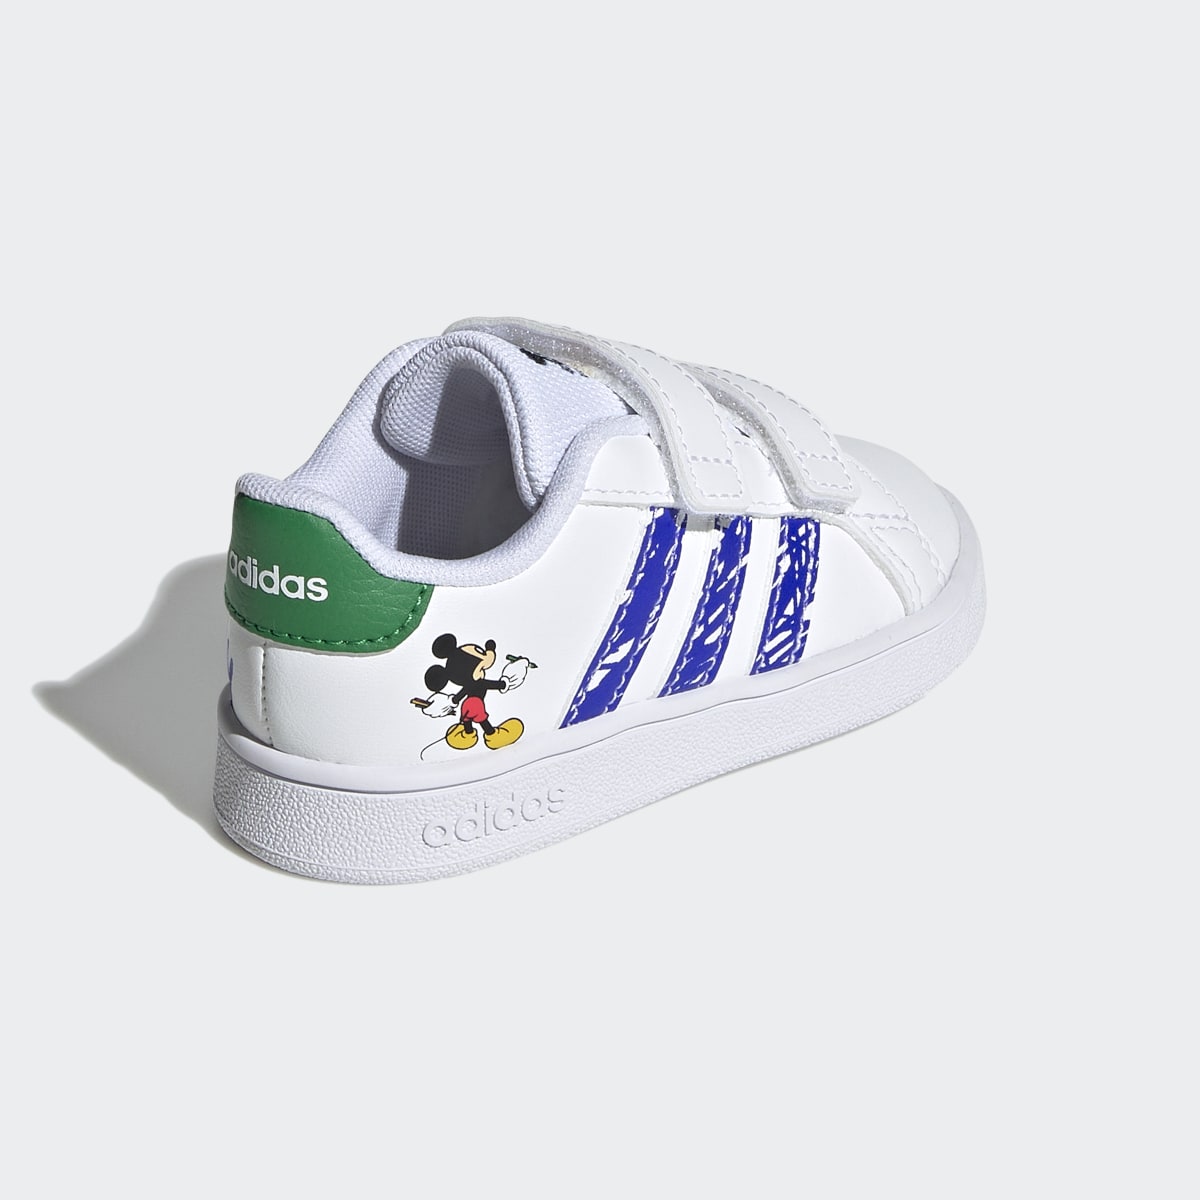 Adidas x Disney Minnie Mouse Grand Court Shoes. 6